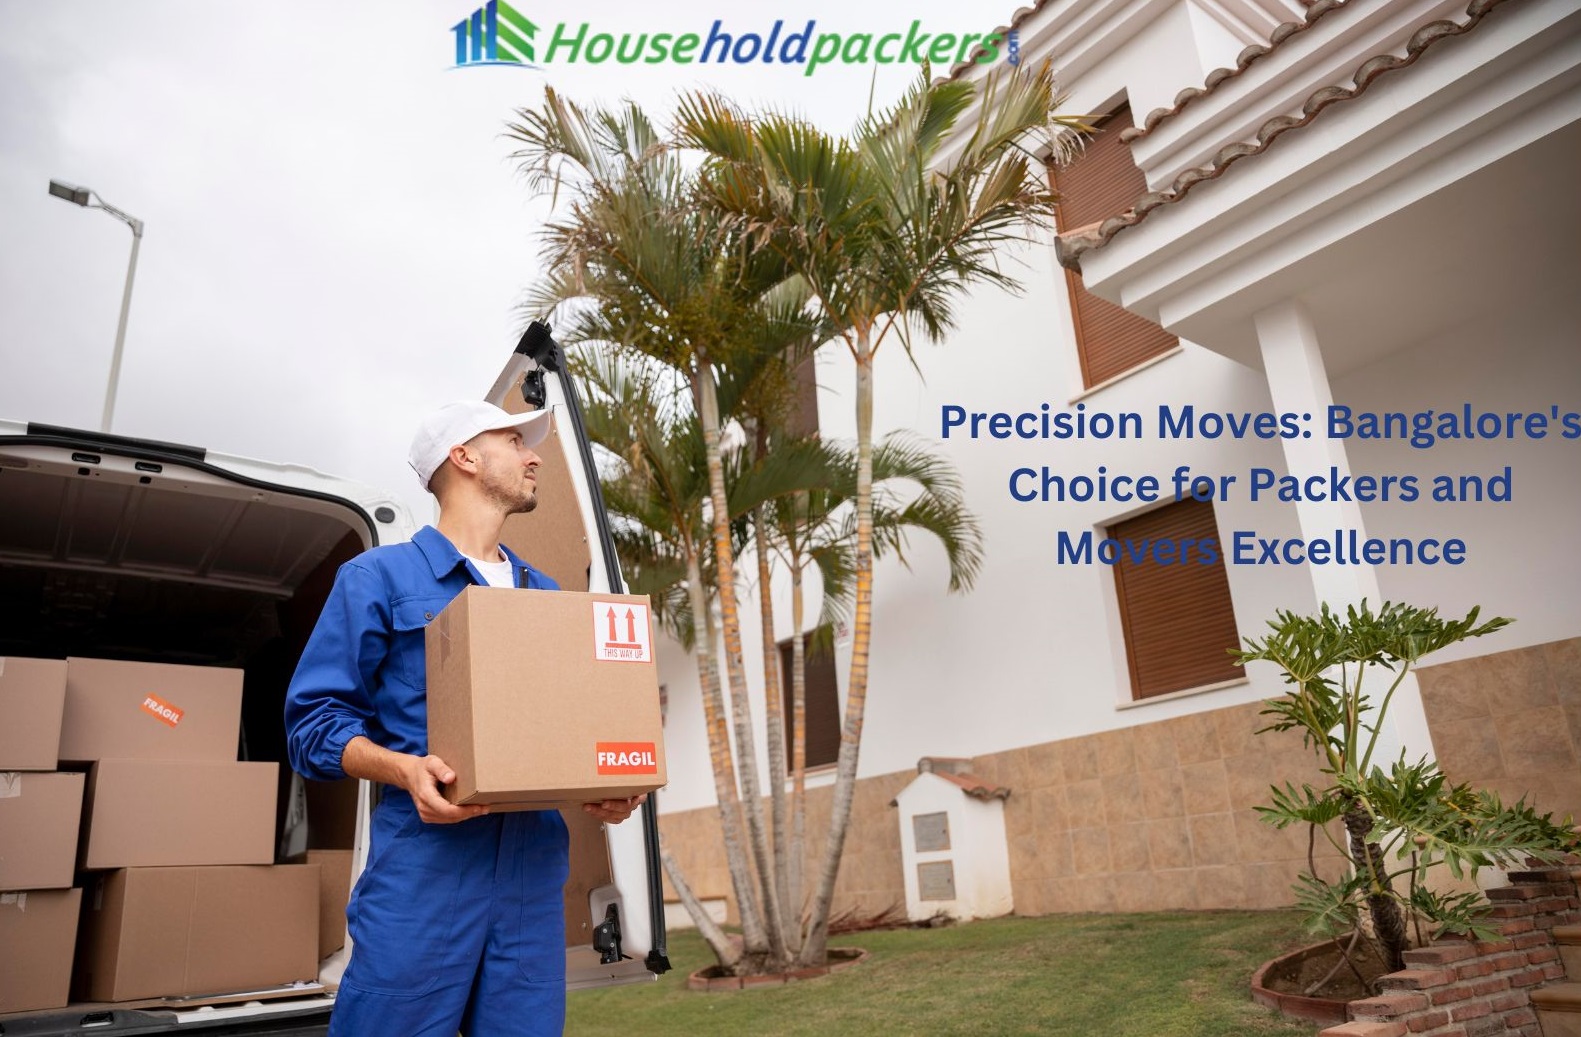 Precision Moves: Bangalore Choice for Packers and Movers Excellence